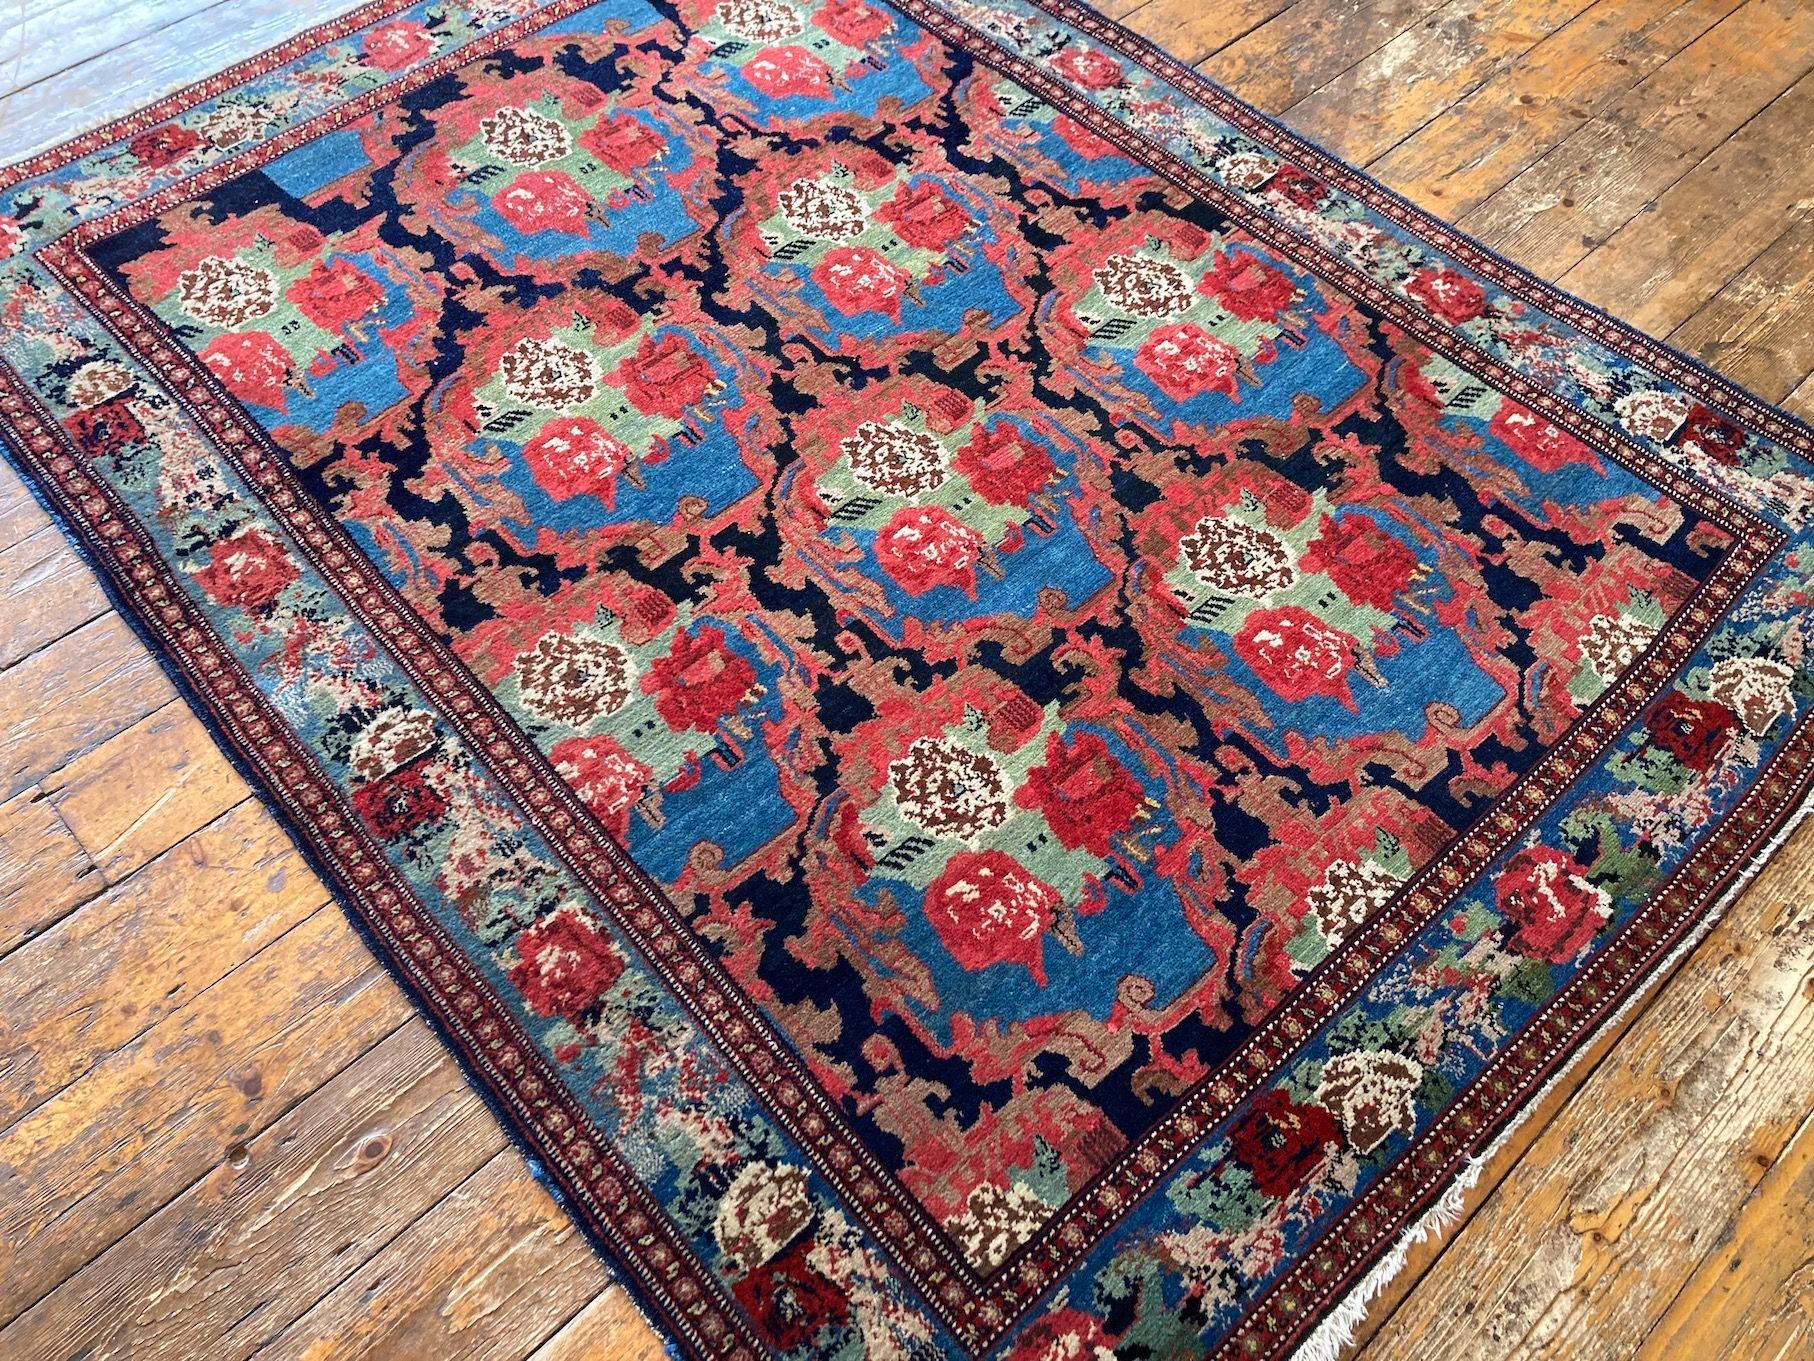 Early 20th Century Antique Senneh Rug 1.82m x 1.38m For Sale